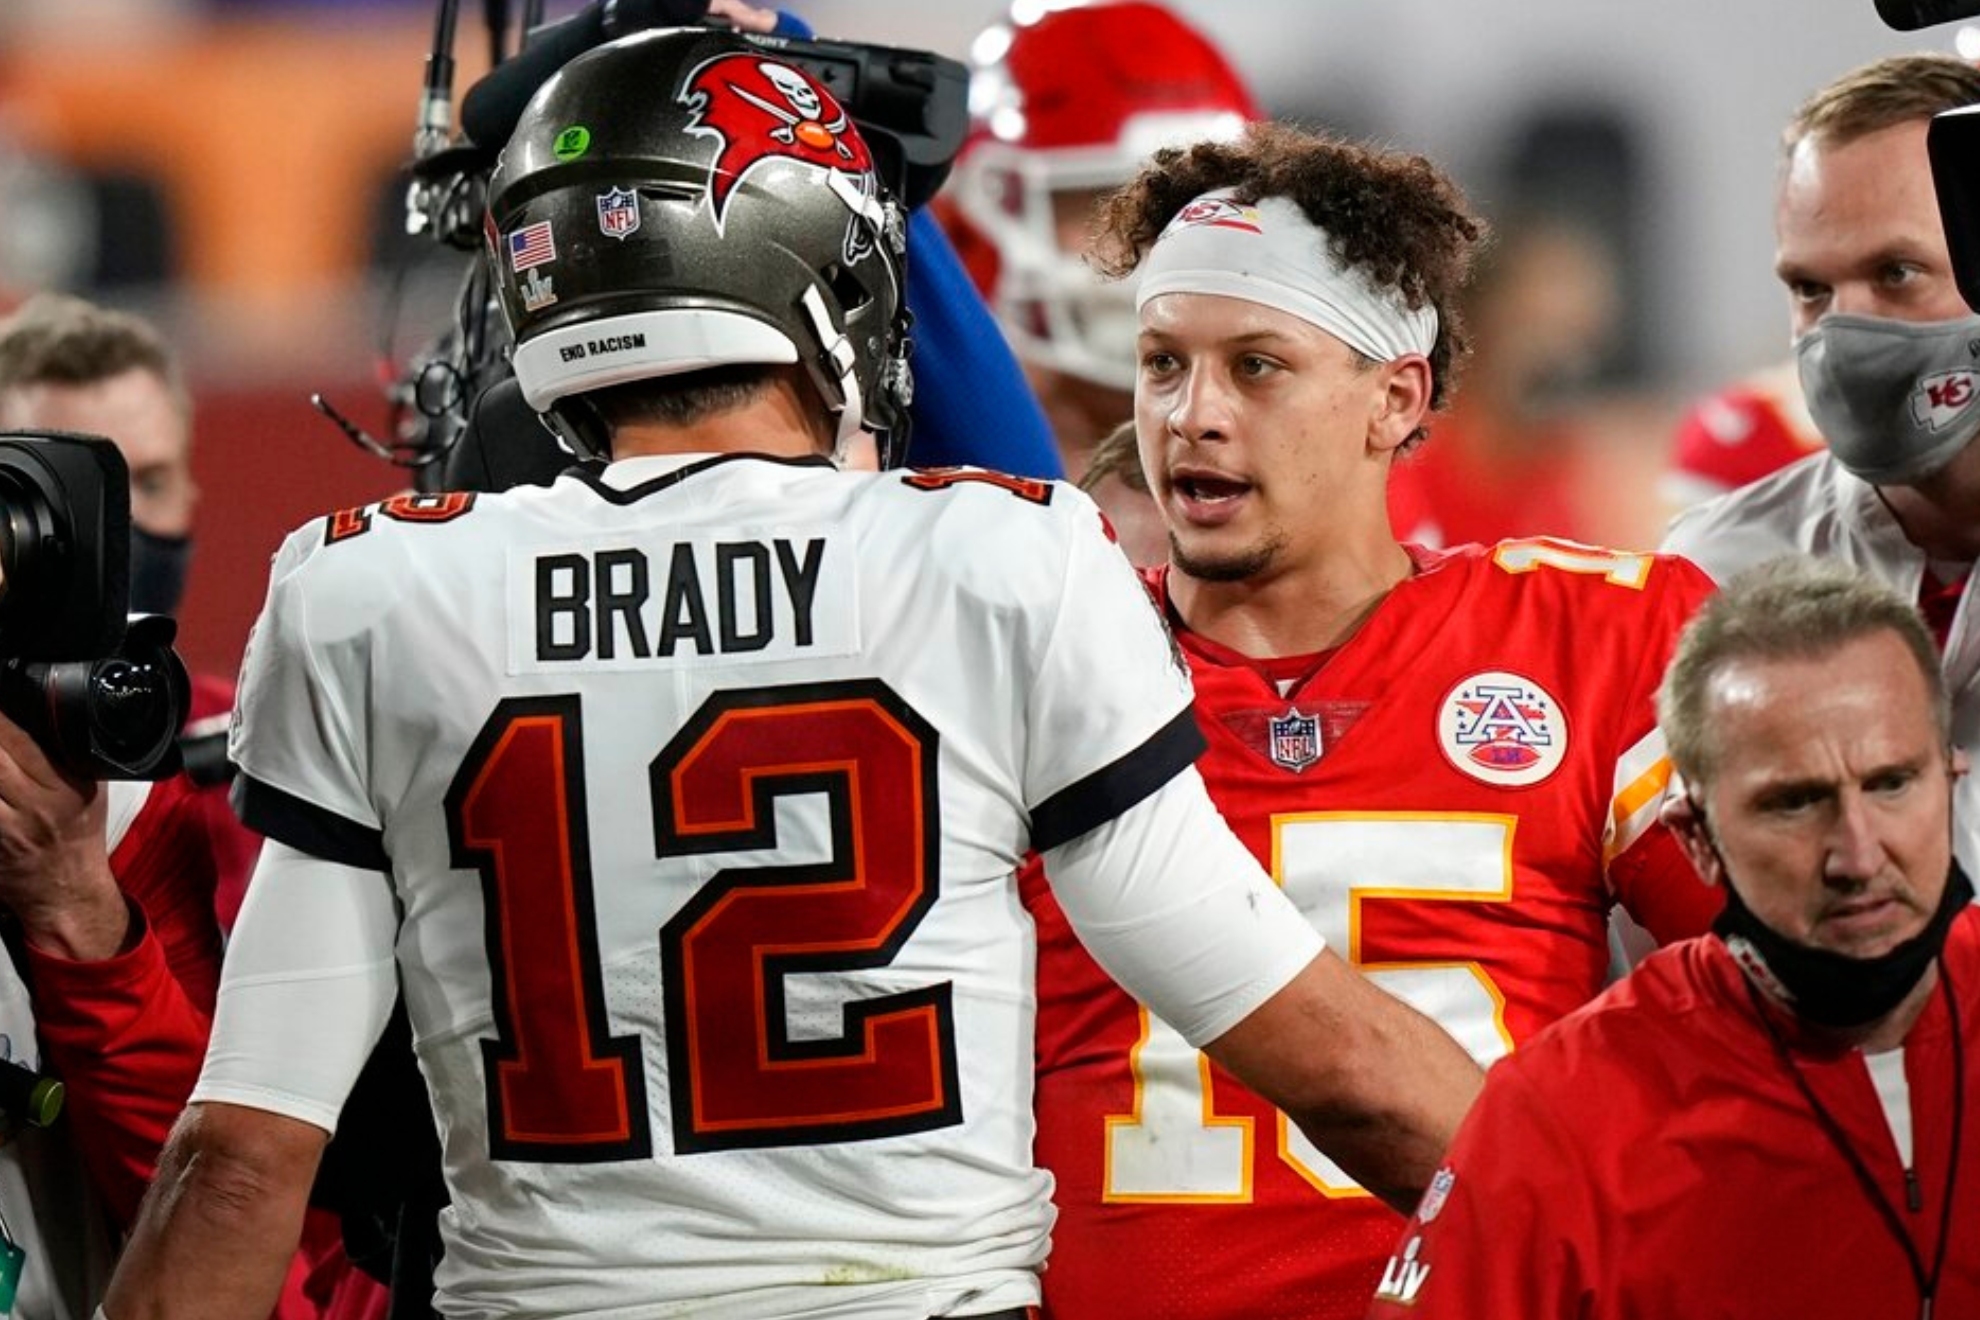 Mahomes has taken over as the face of the league since Bradys departure